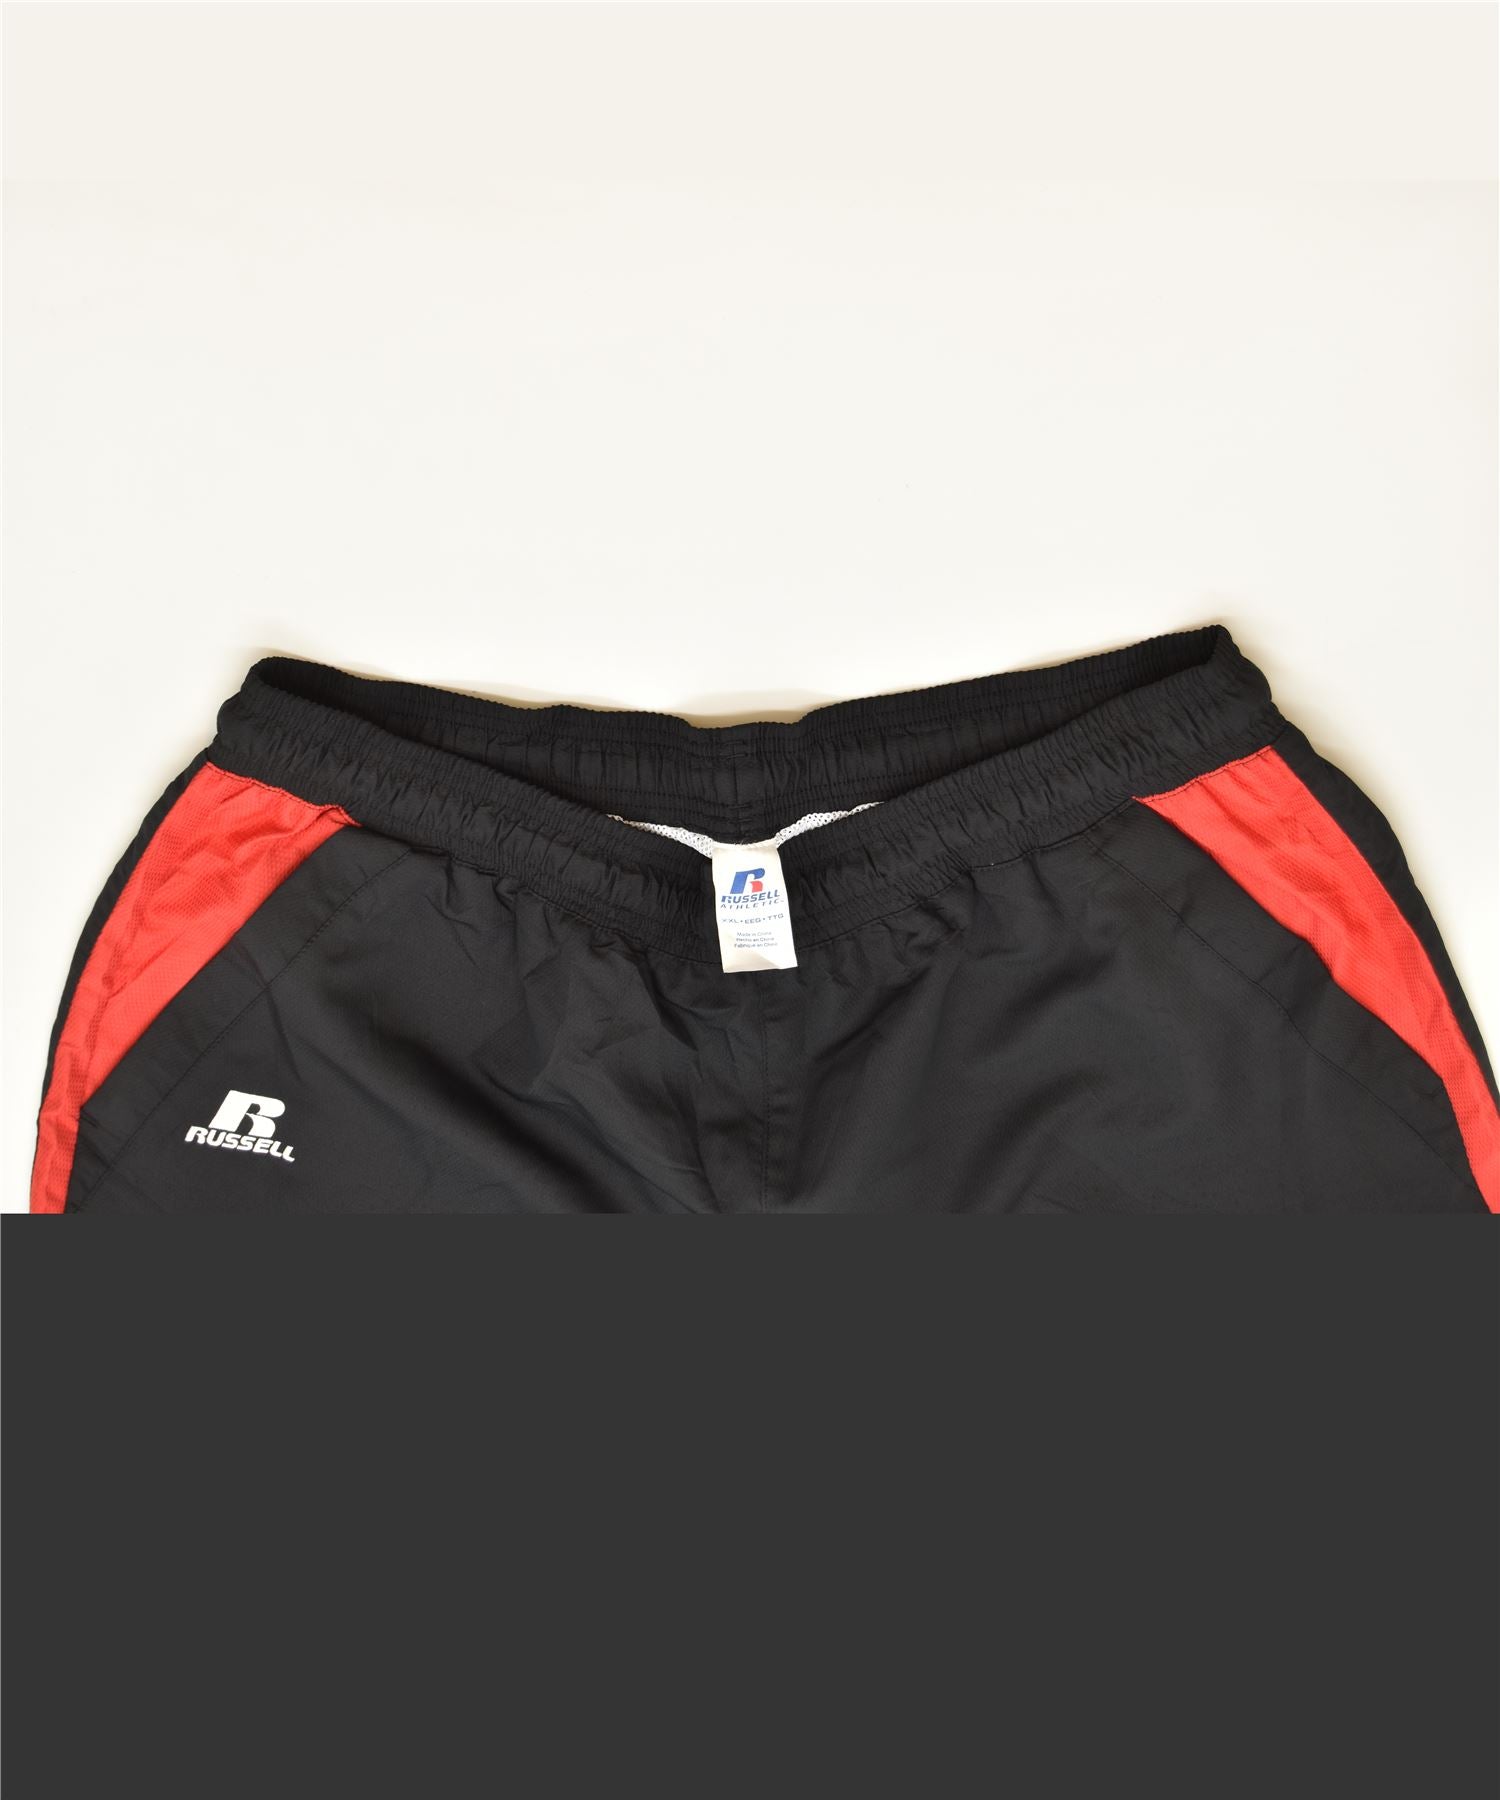 Russell Athletic Athletic Pants Women's Black Used